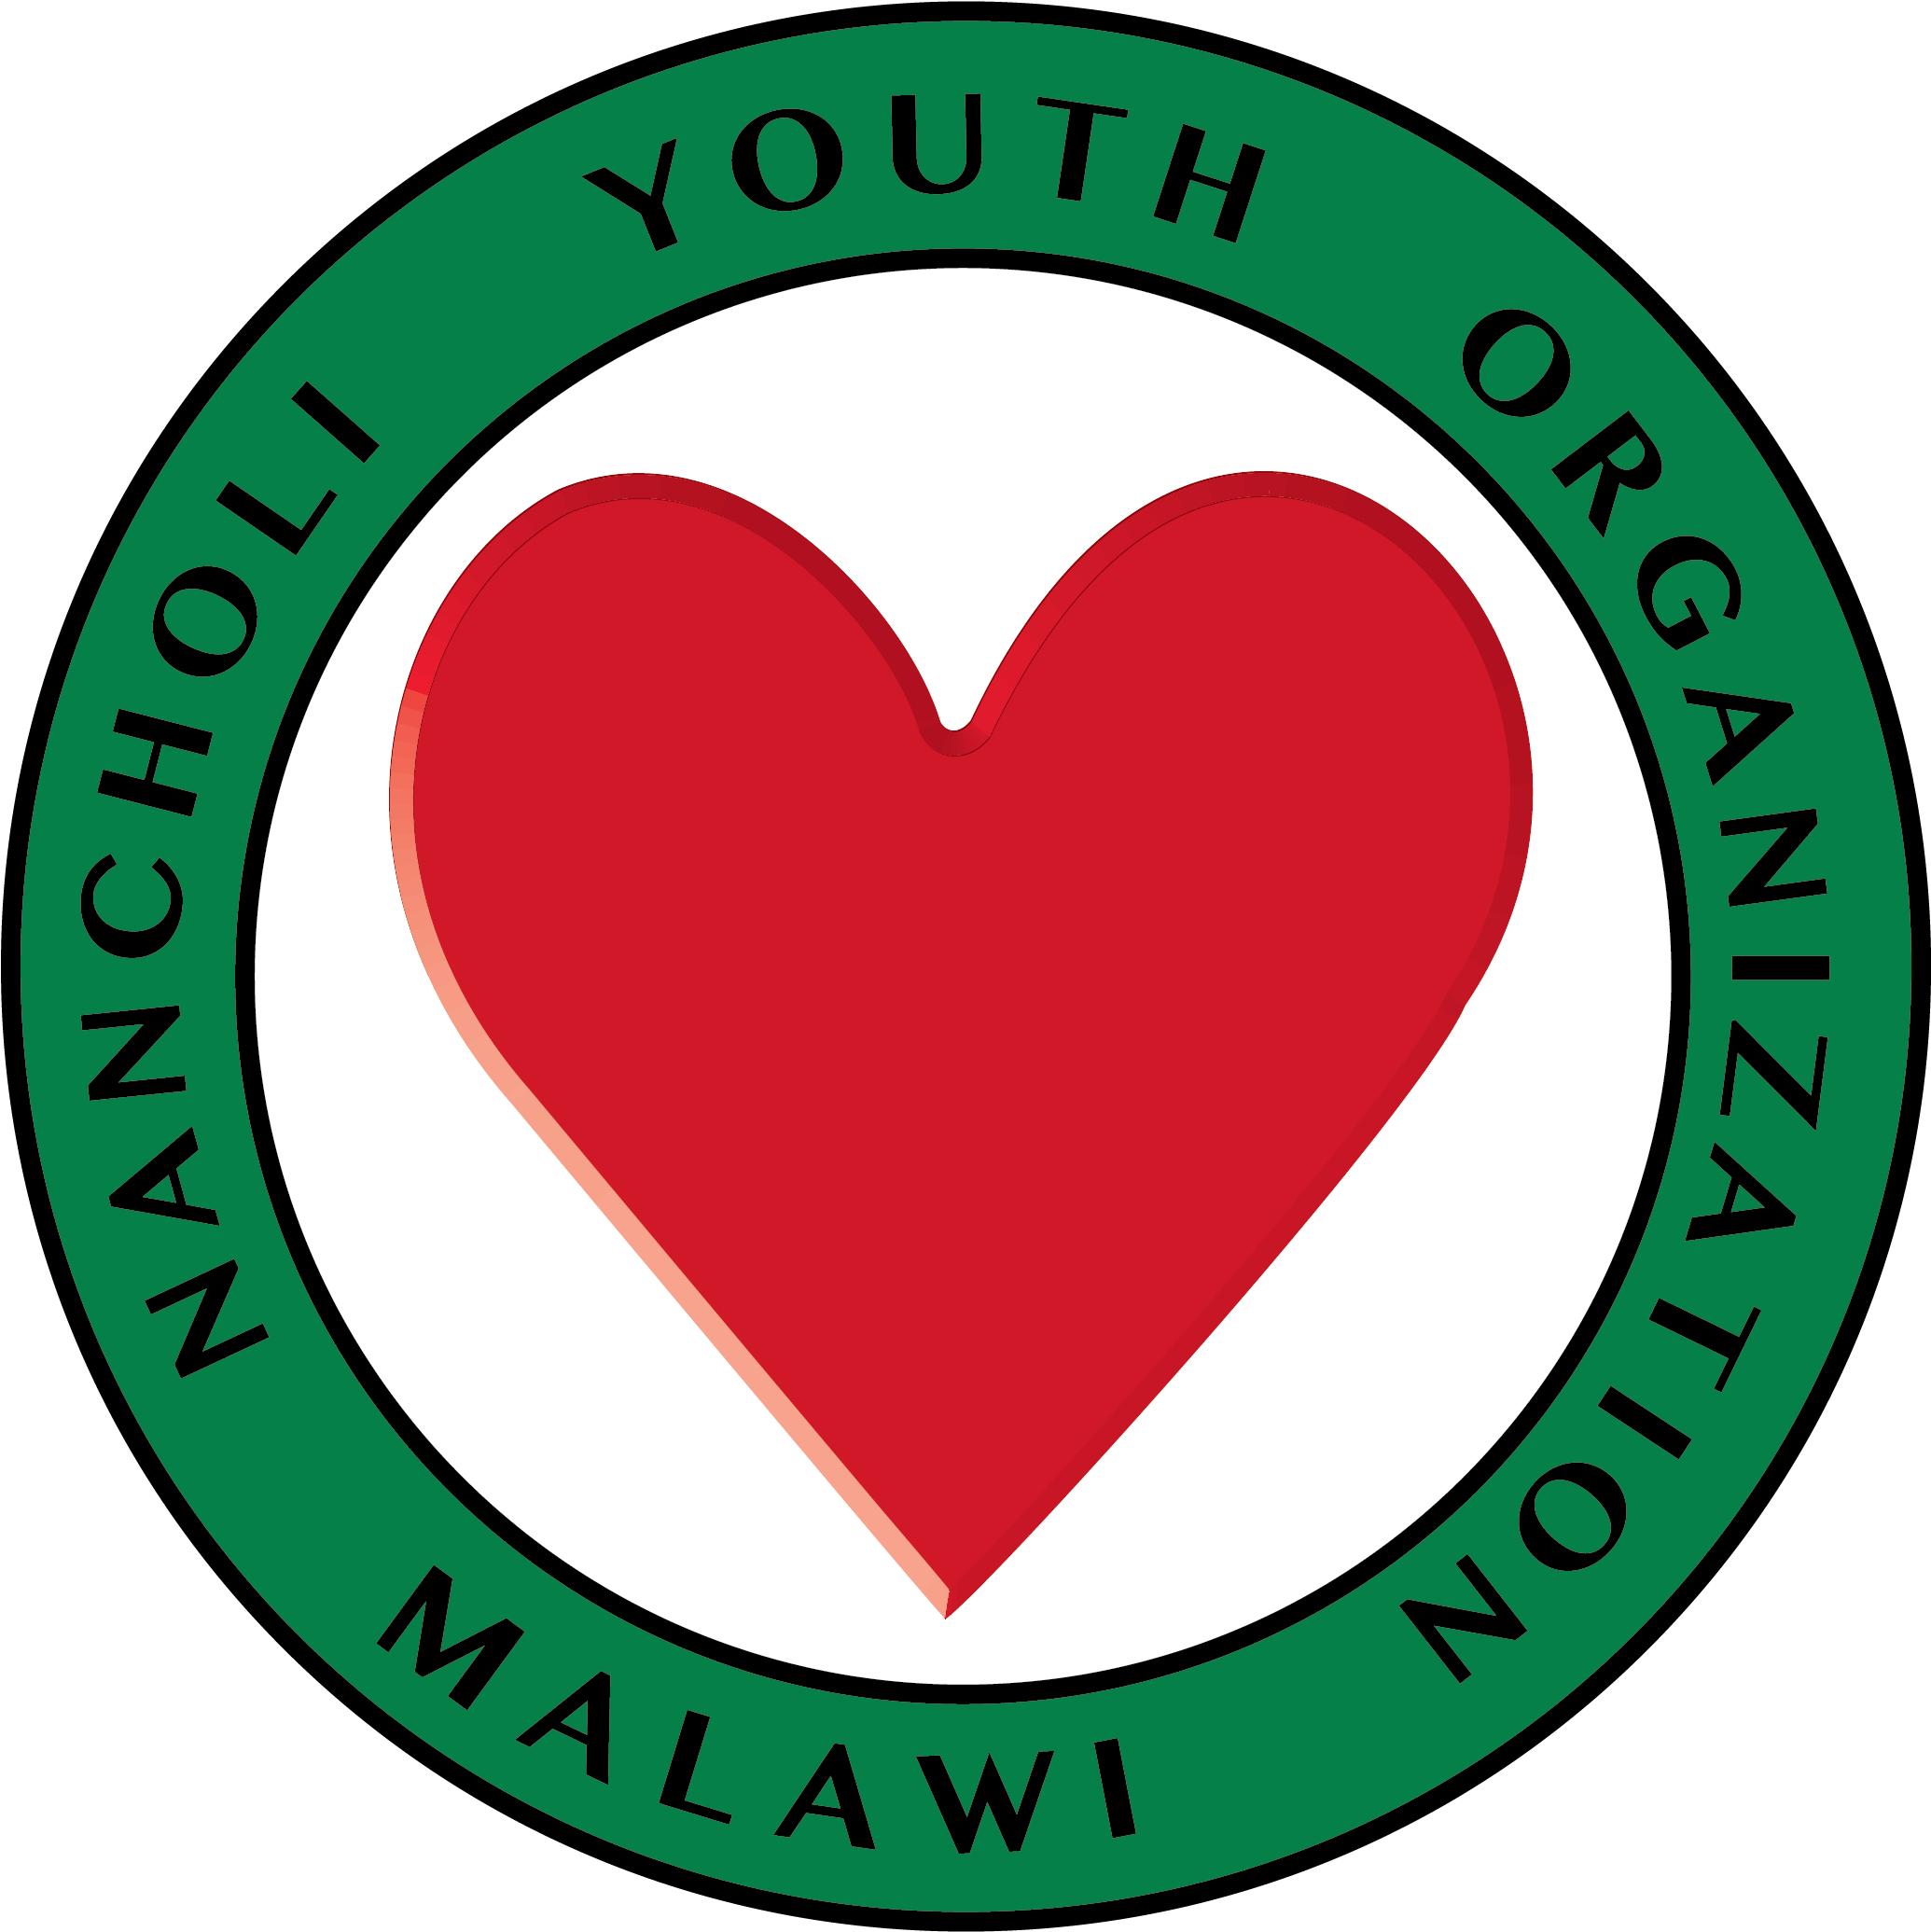 One Heart, One Vision To Develop Communities - Nancholi Youth Organization (2125x2129)